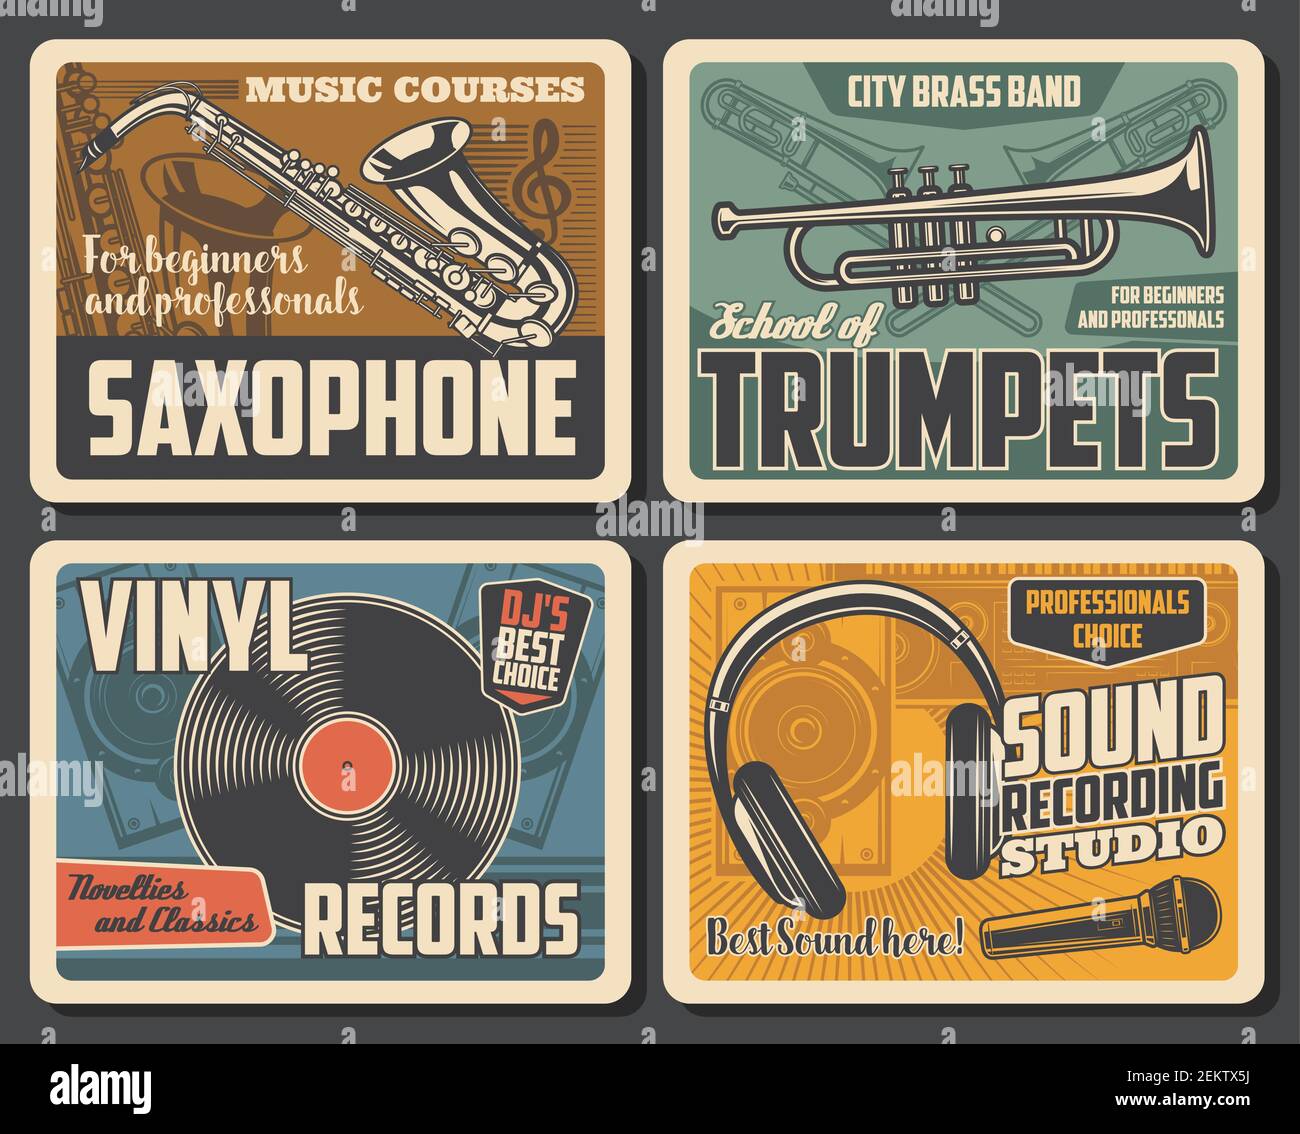 Saxophone and trumpets, vinyl records and sound recording studio. Vector retro microphone and headphones, loudspeakers and brass band. Classical music Stock Vector